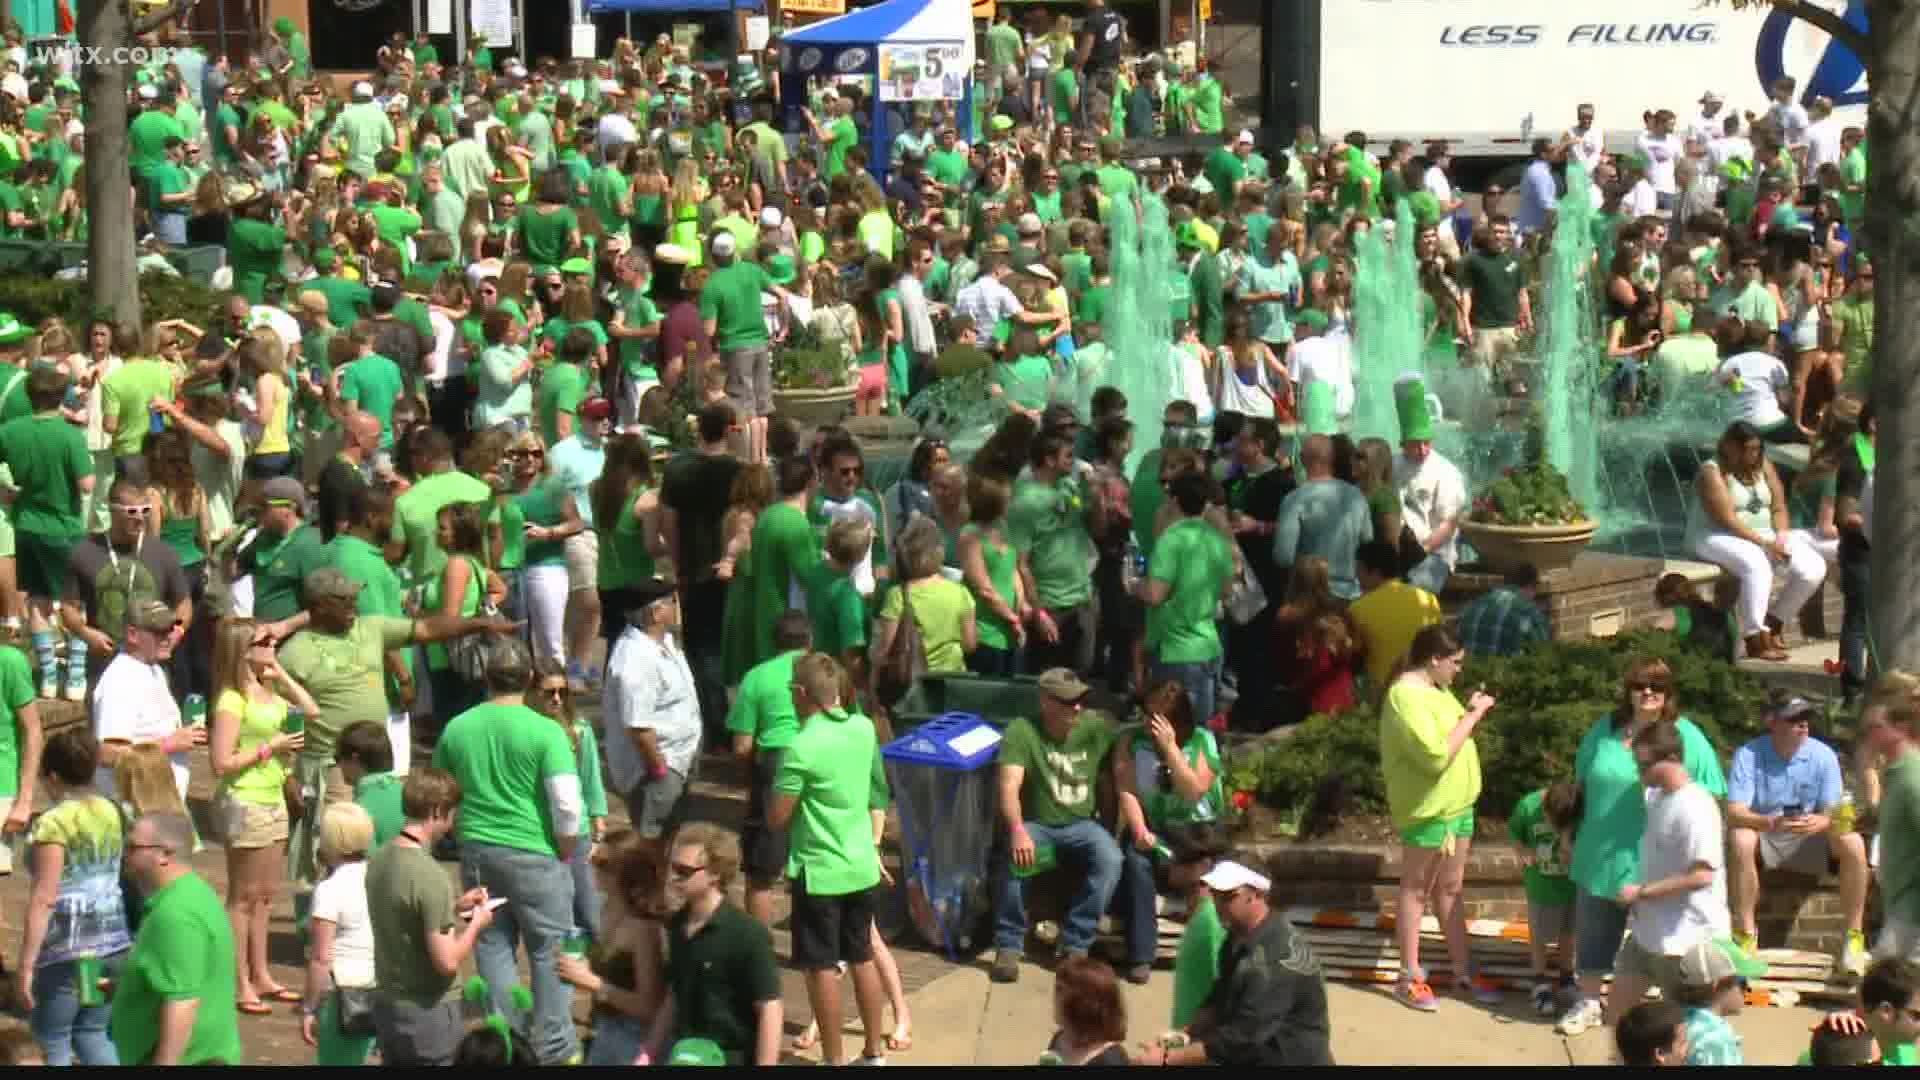 Due to COVID-19, annual celebration in Columbia's entertainment district has been cancelled